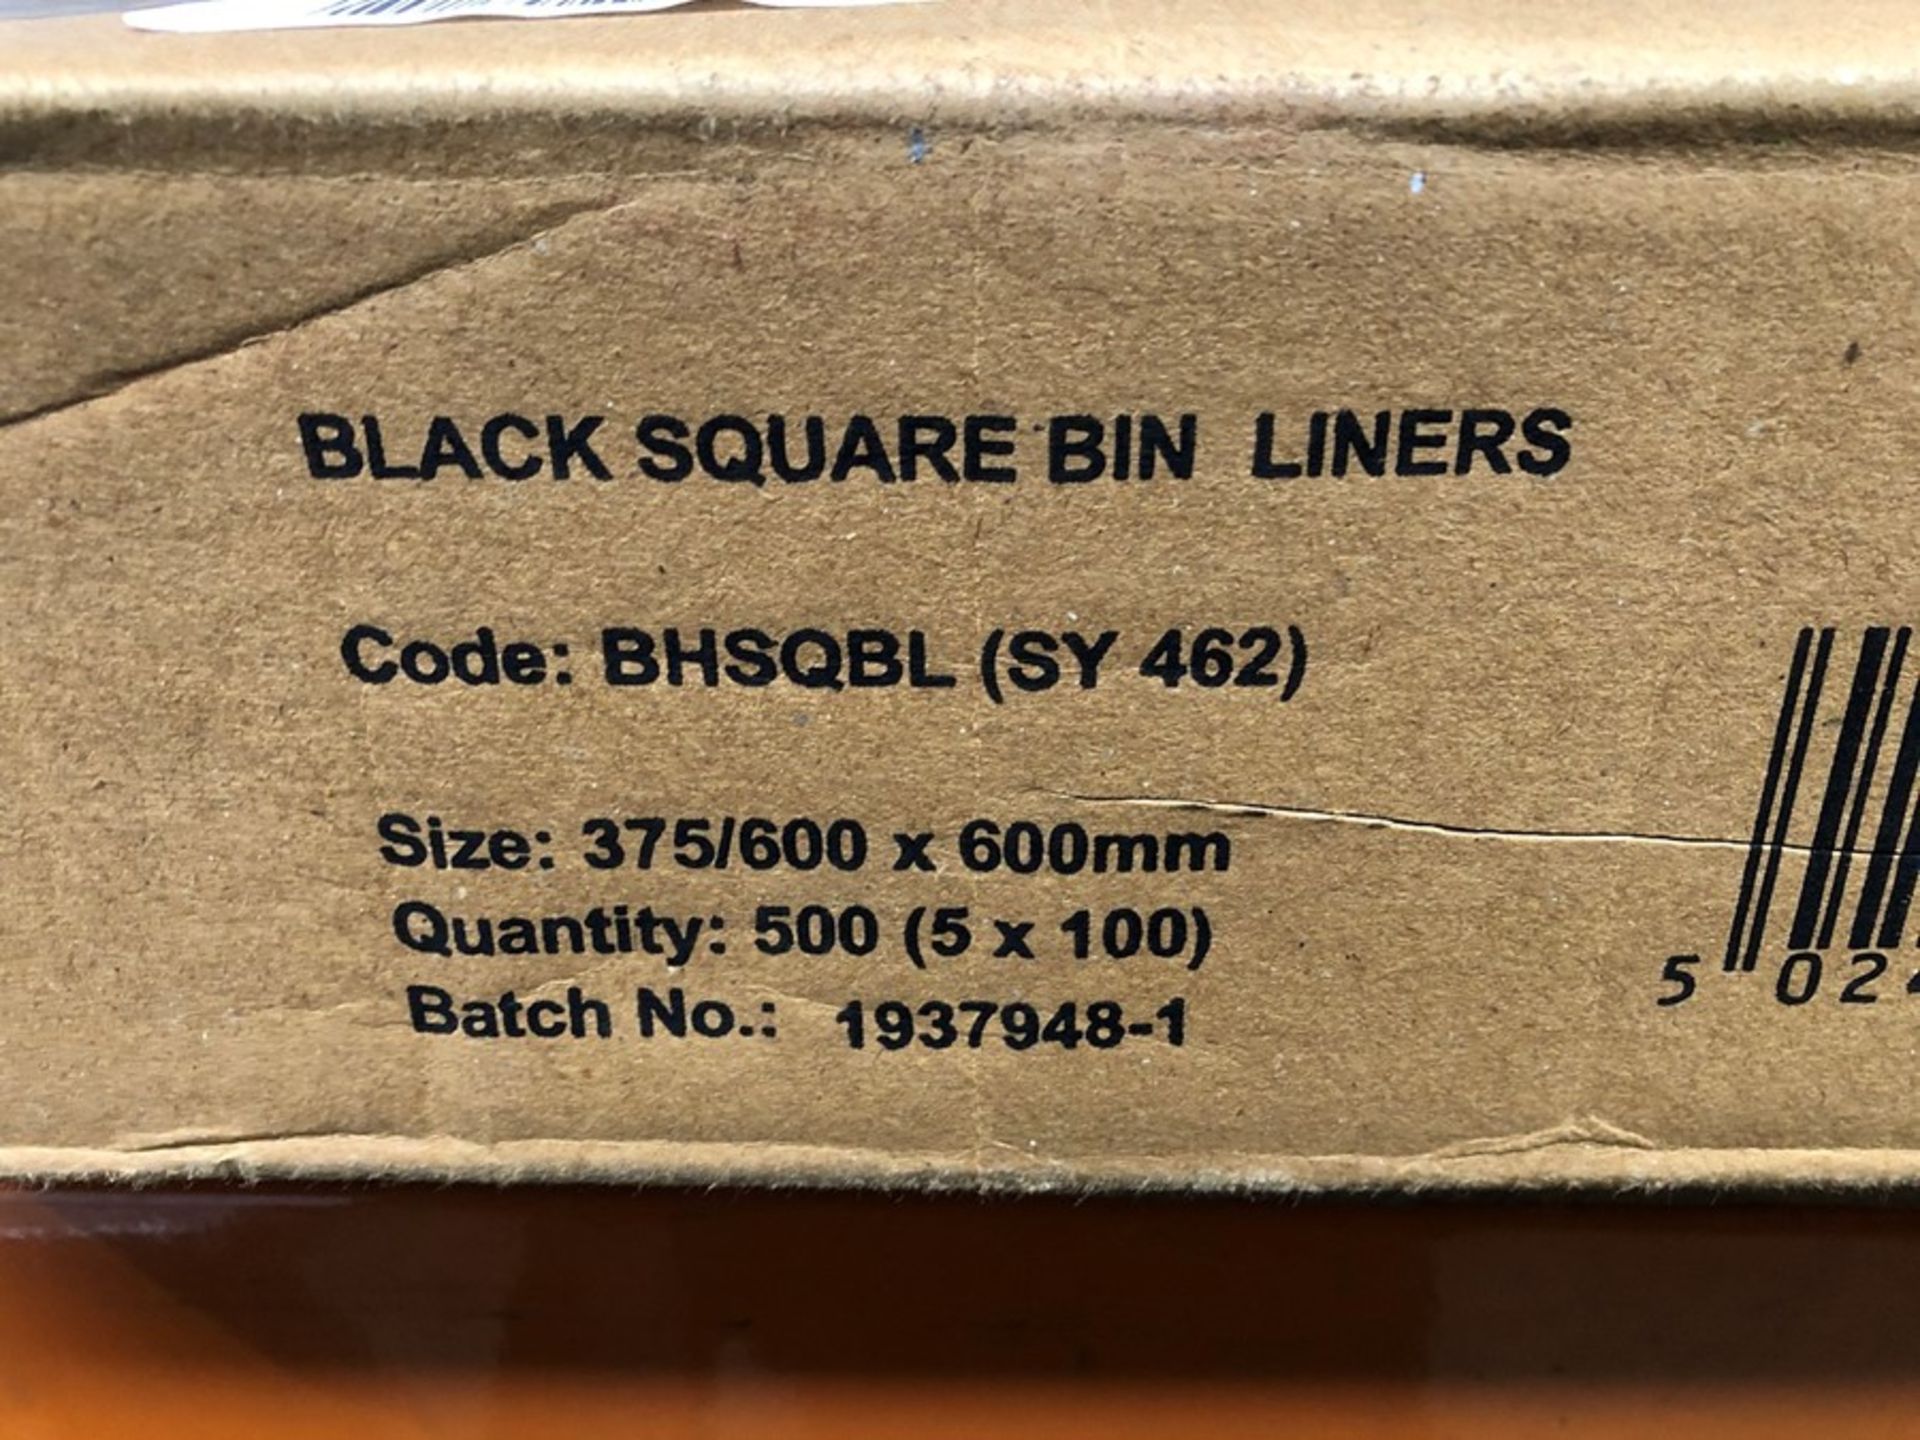 1 BOXED SET TO CONTAIN 500 BLACK SQUARE BIN LINERS (PUBLIC VIEWING AVAILABLE)